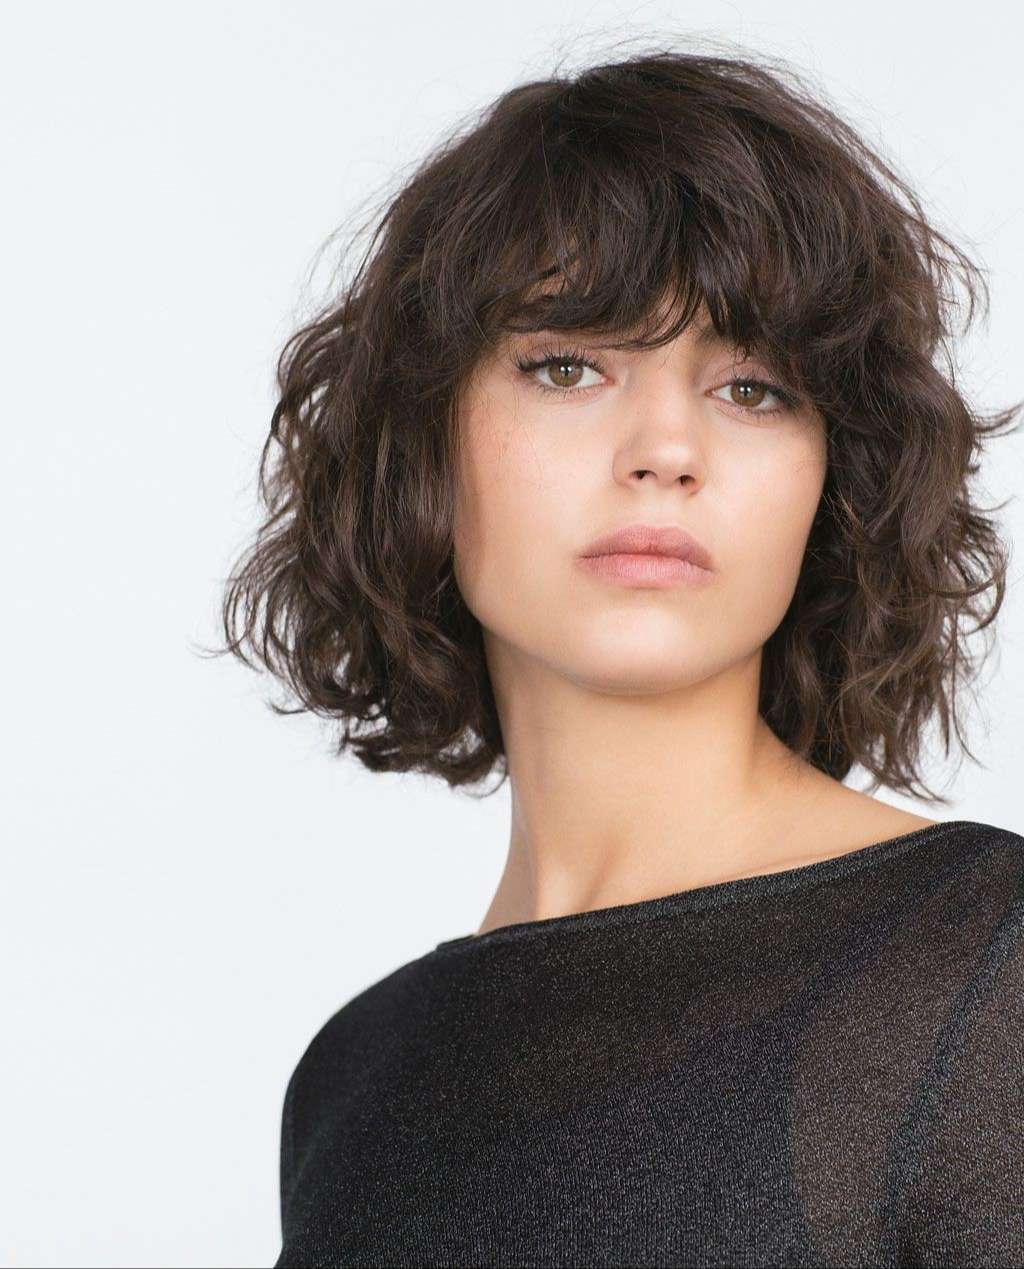 Wild blown wavy bob haircut with curled end fringe